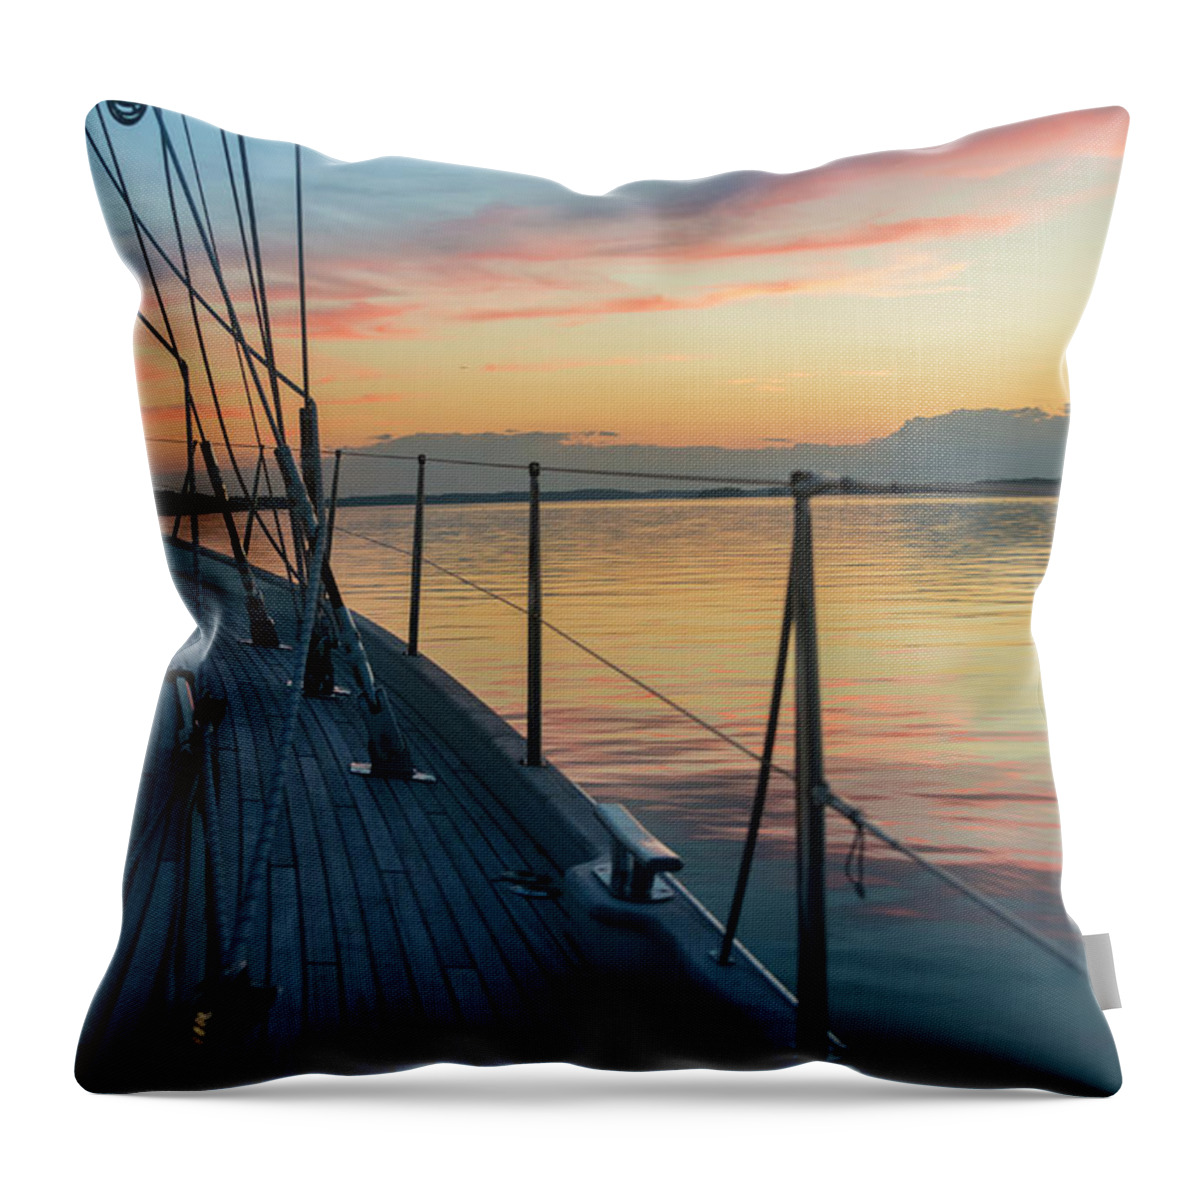 Tranquility Throw Pillow featuring the photograph Bow Of 62 Ft Sailboat At Sunset by Gary S Chapman